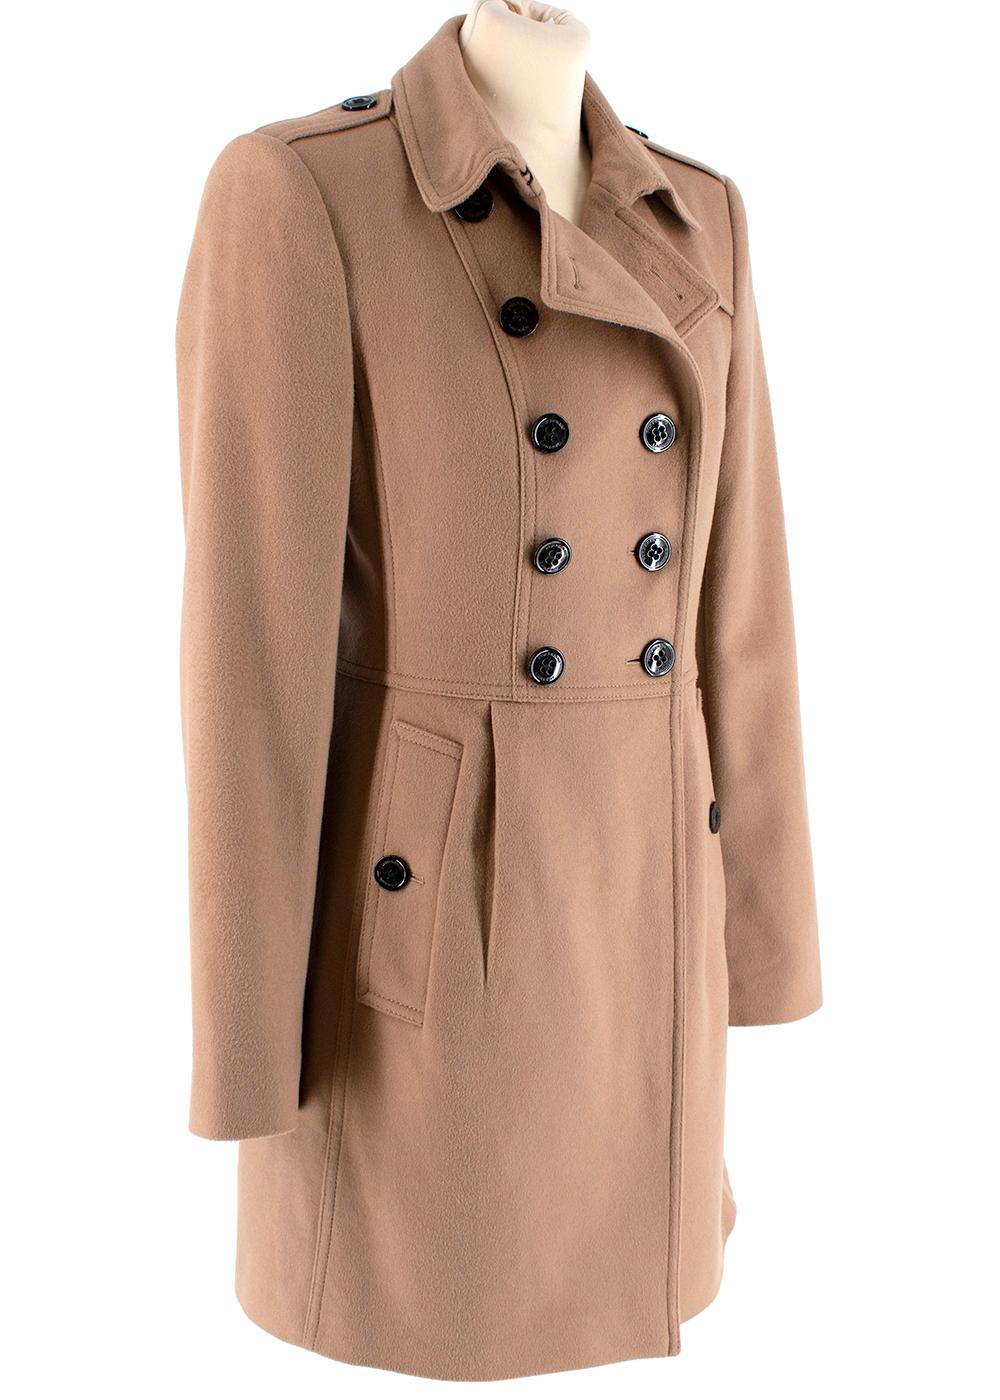 Burberry Camel Cashmere Blend Coat 

- Made of a luxurious soft cashmere and wool blend 
- Neutral camel hue 
- Classic double breasted cut 
- Button fastening ot the front
- Pleat details to the waist 
Buttoned cuffs 
- Pockets to the front 
-